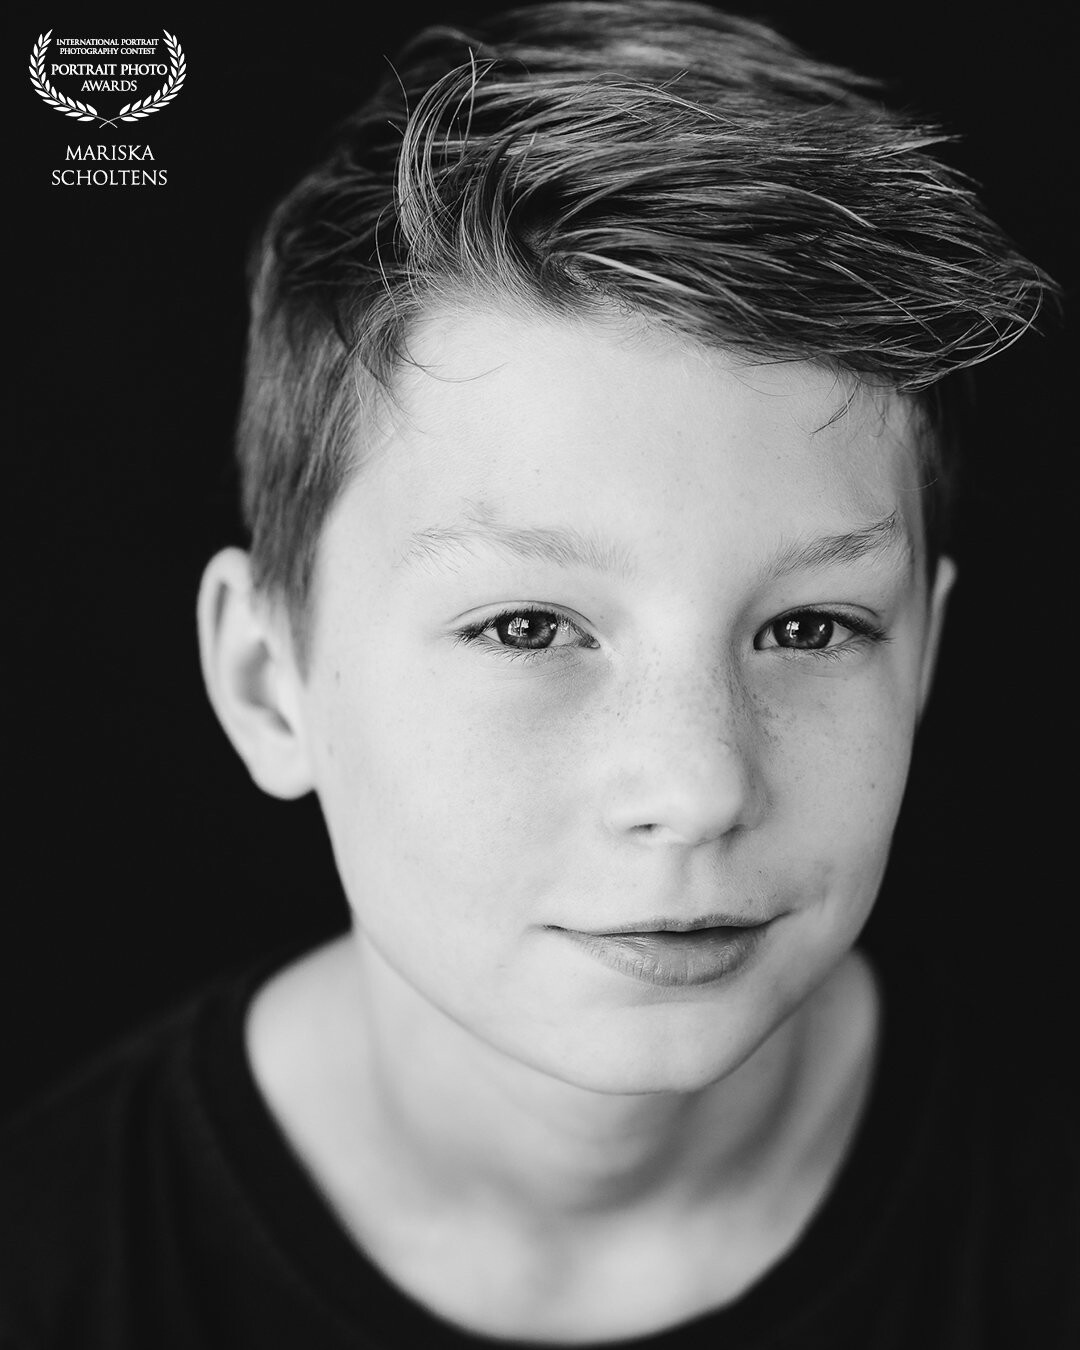 I used only natural daylight and a black background for this portrait. It was litteraly the first photo of the photoshoot of this eleven year old boy!